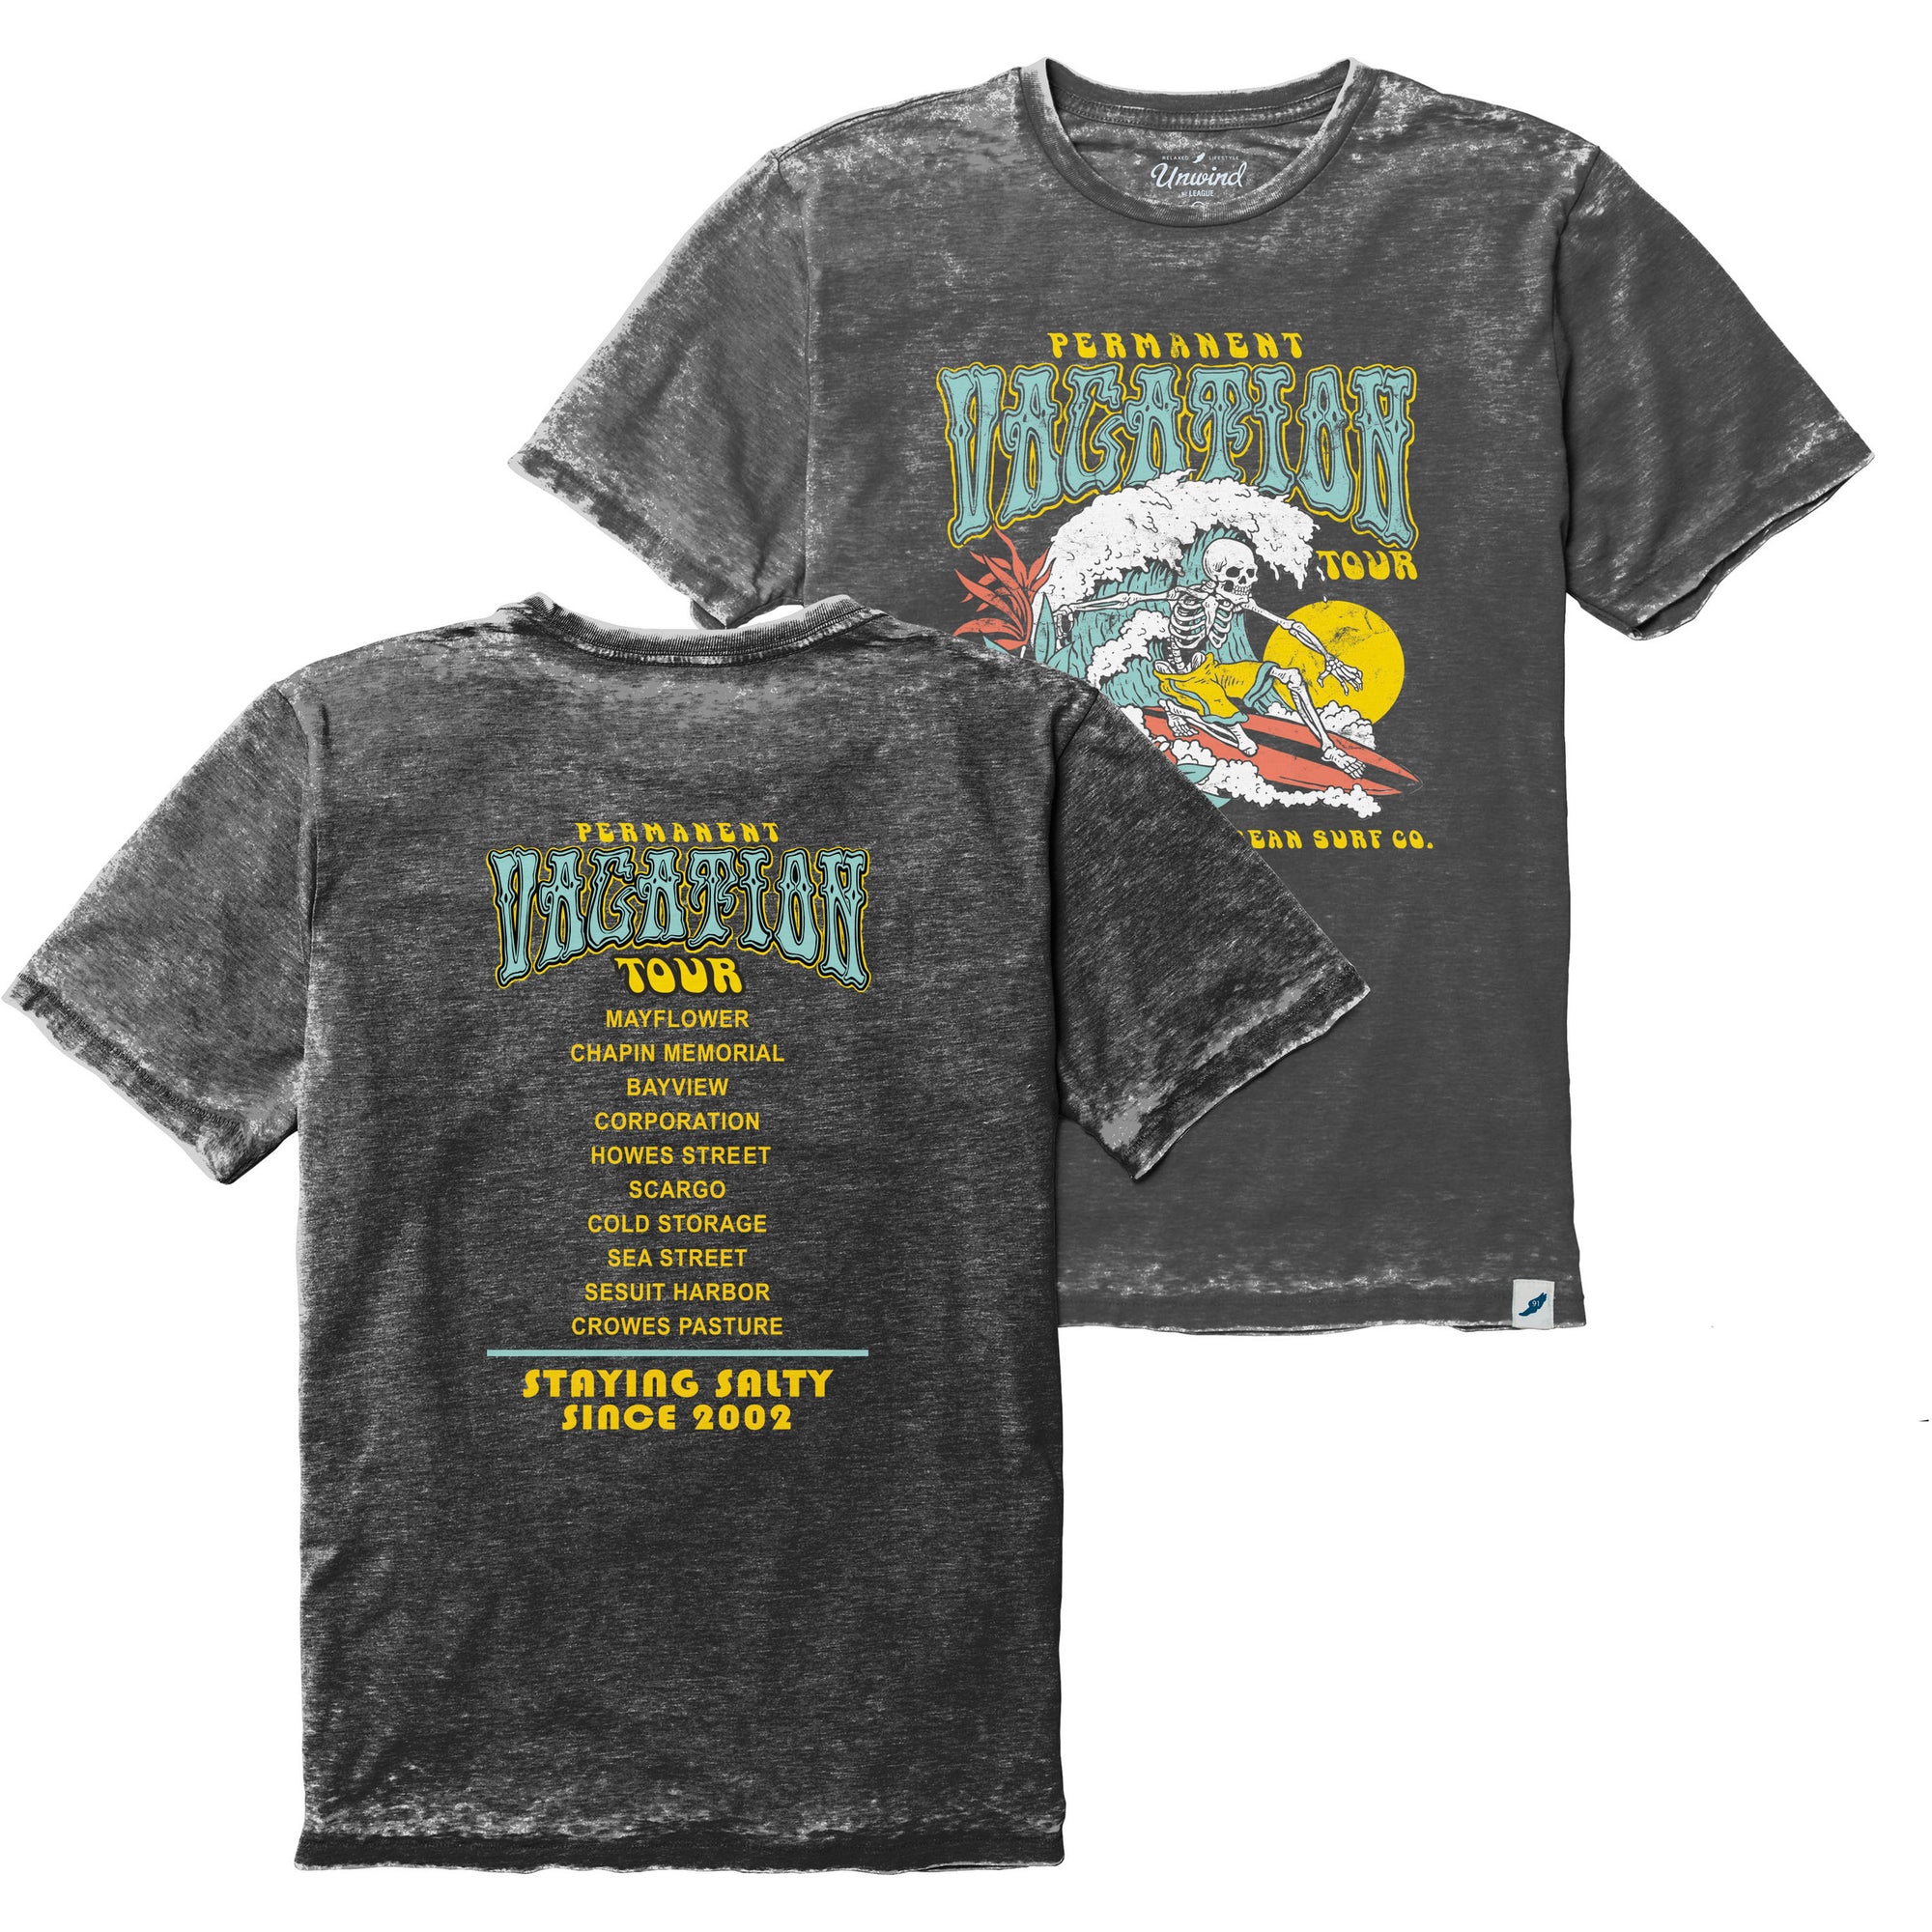 Permanent Vacation Tour Tee